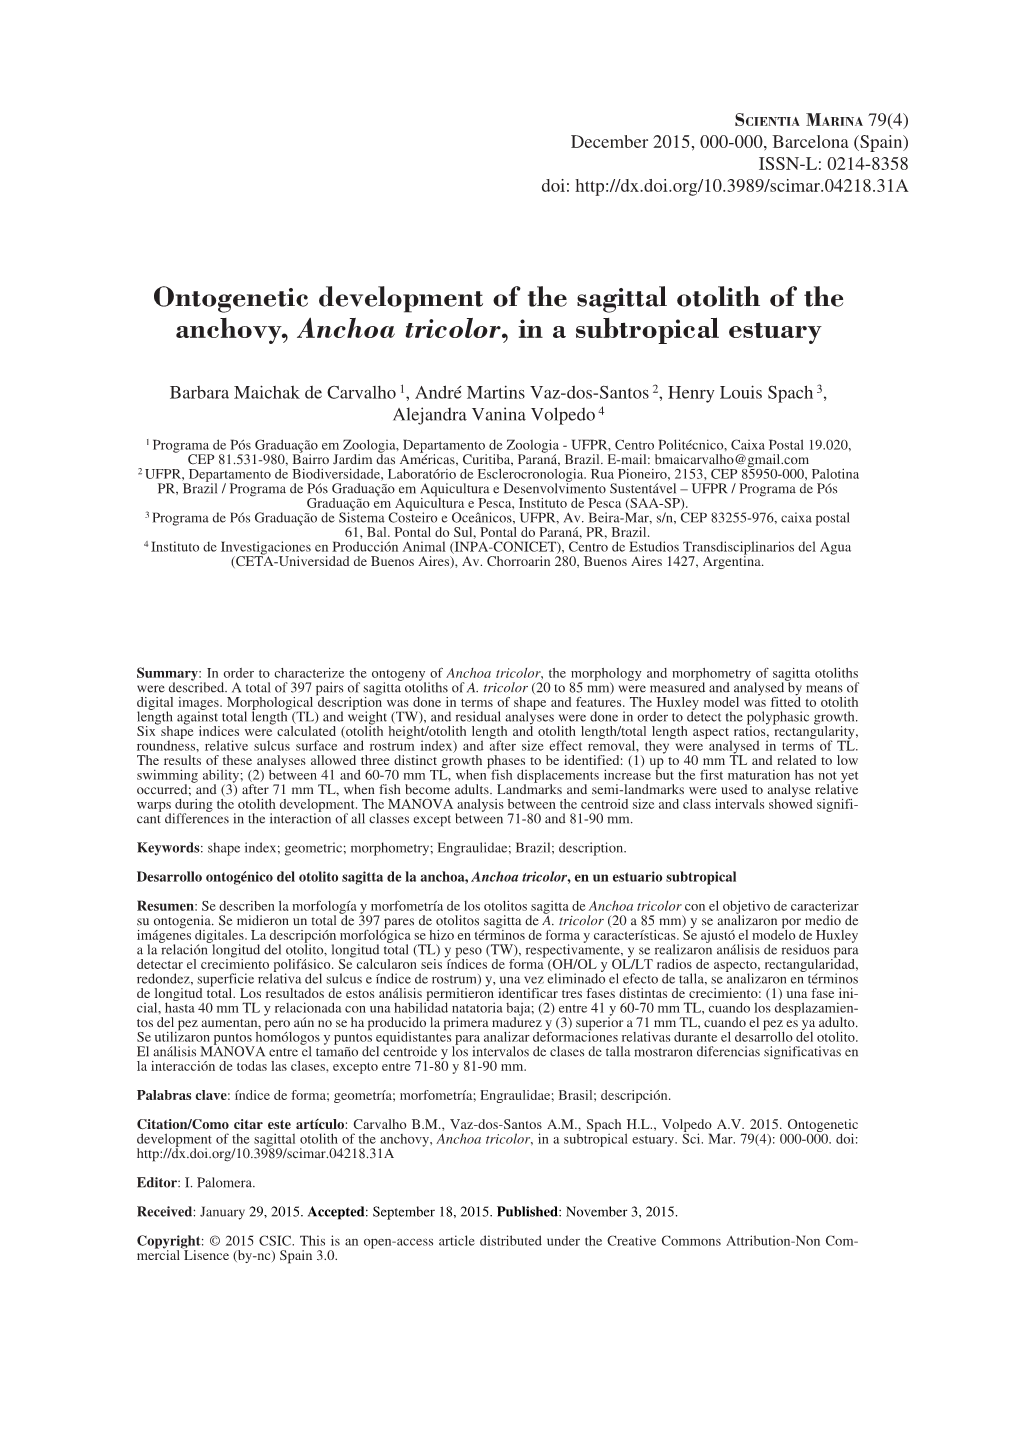 Ontogenetic Development of the Sagittal Otolith of the Anchovy, Anchoa Tricolor, in a Subtropical Estuary